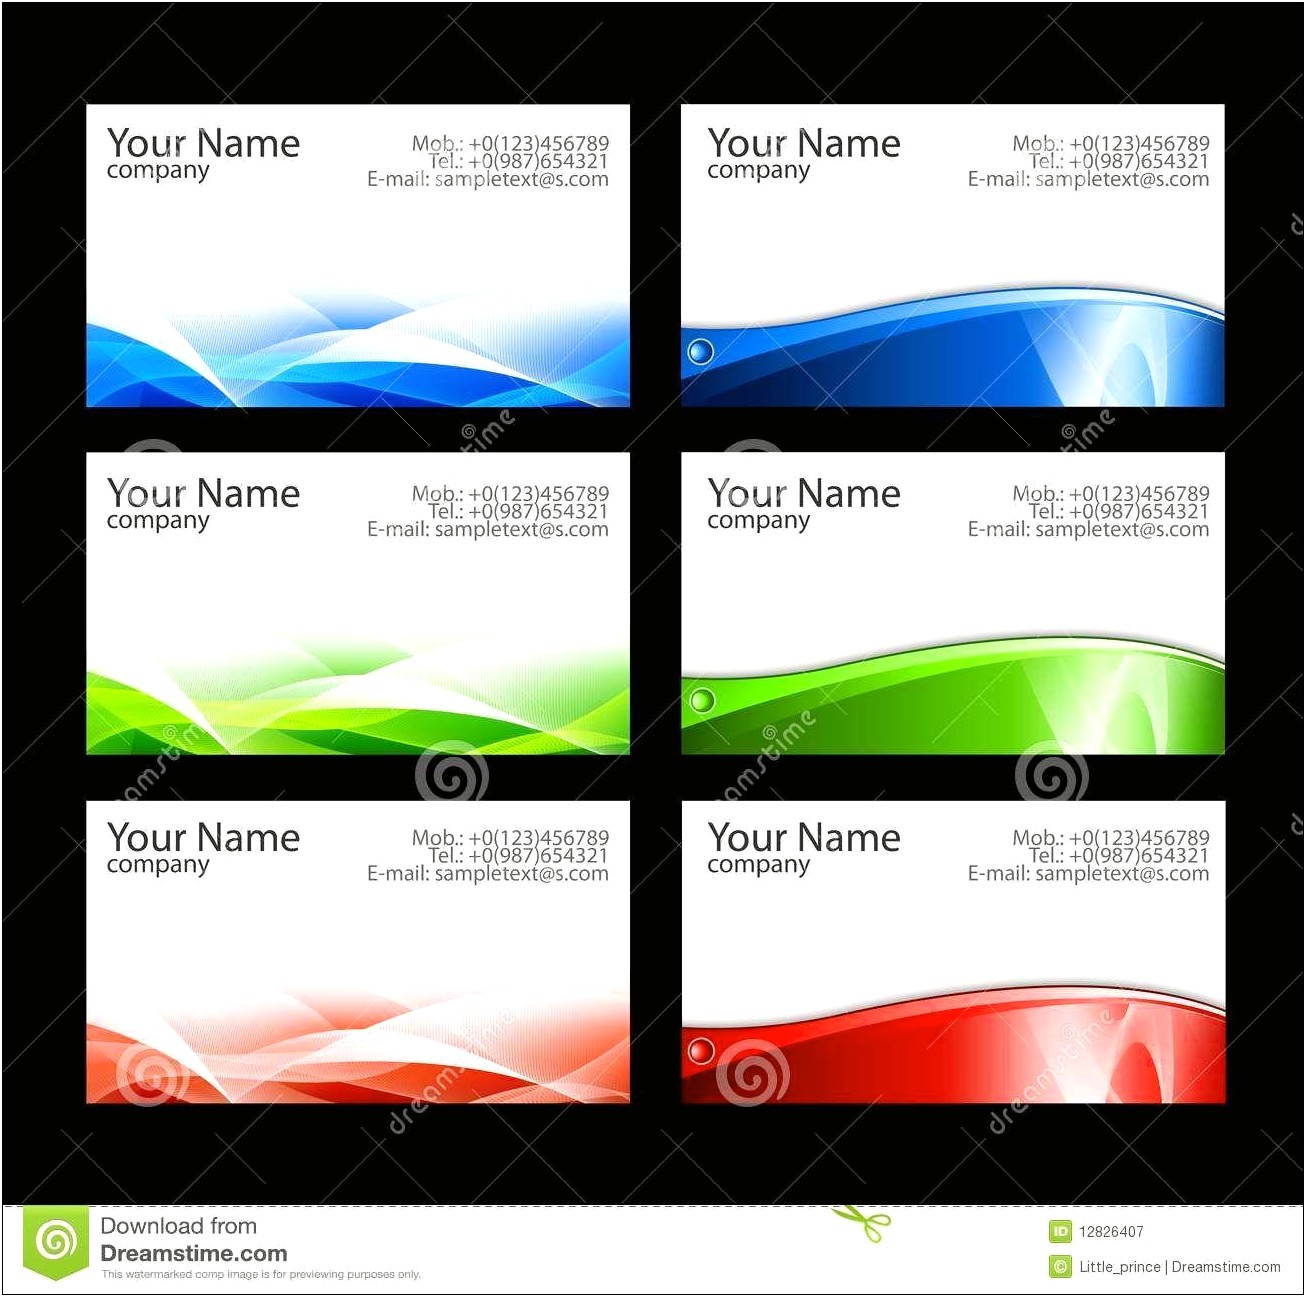 Microsoft Word Business Card Layout Template